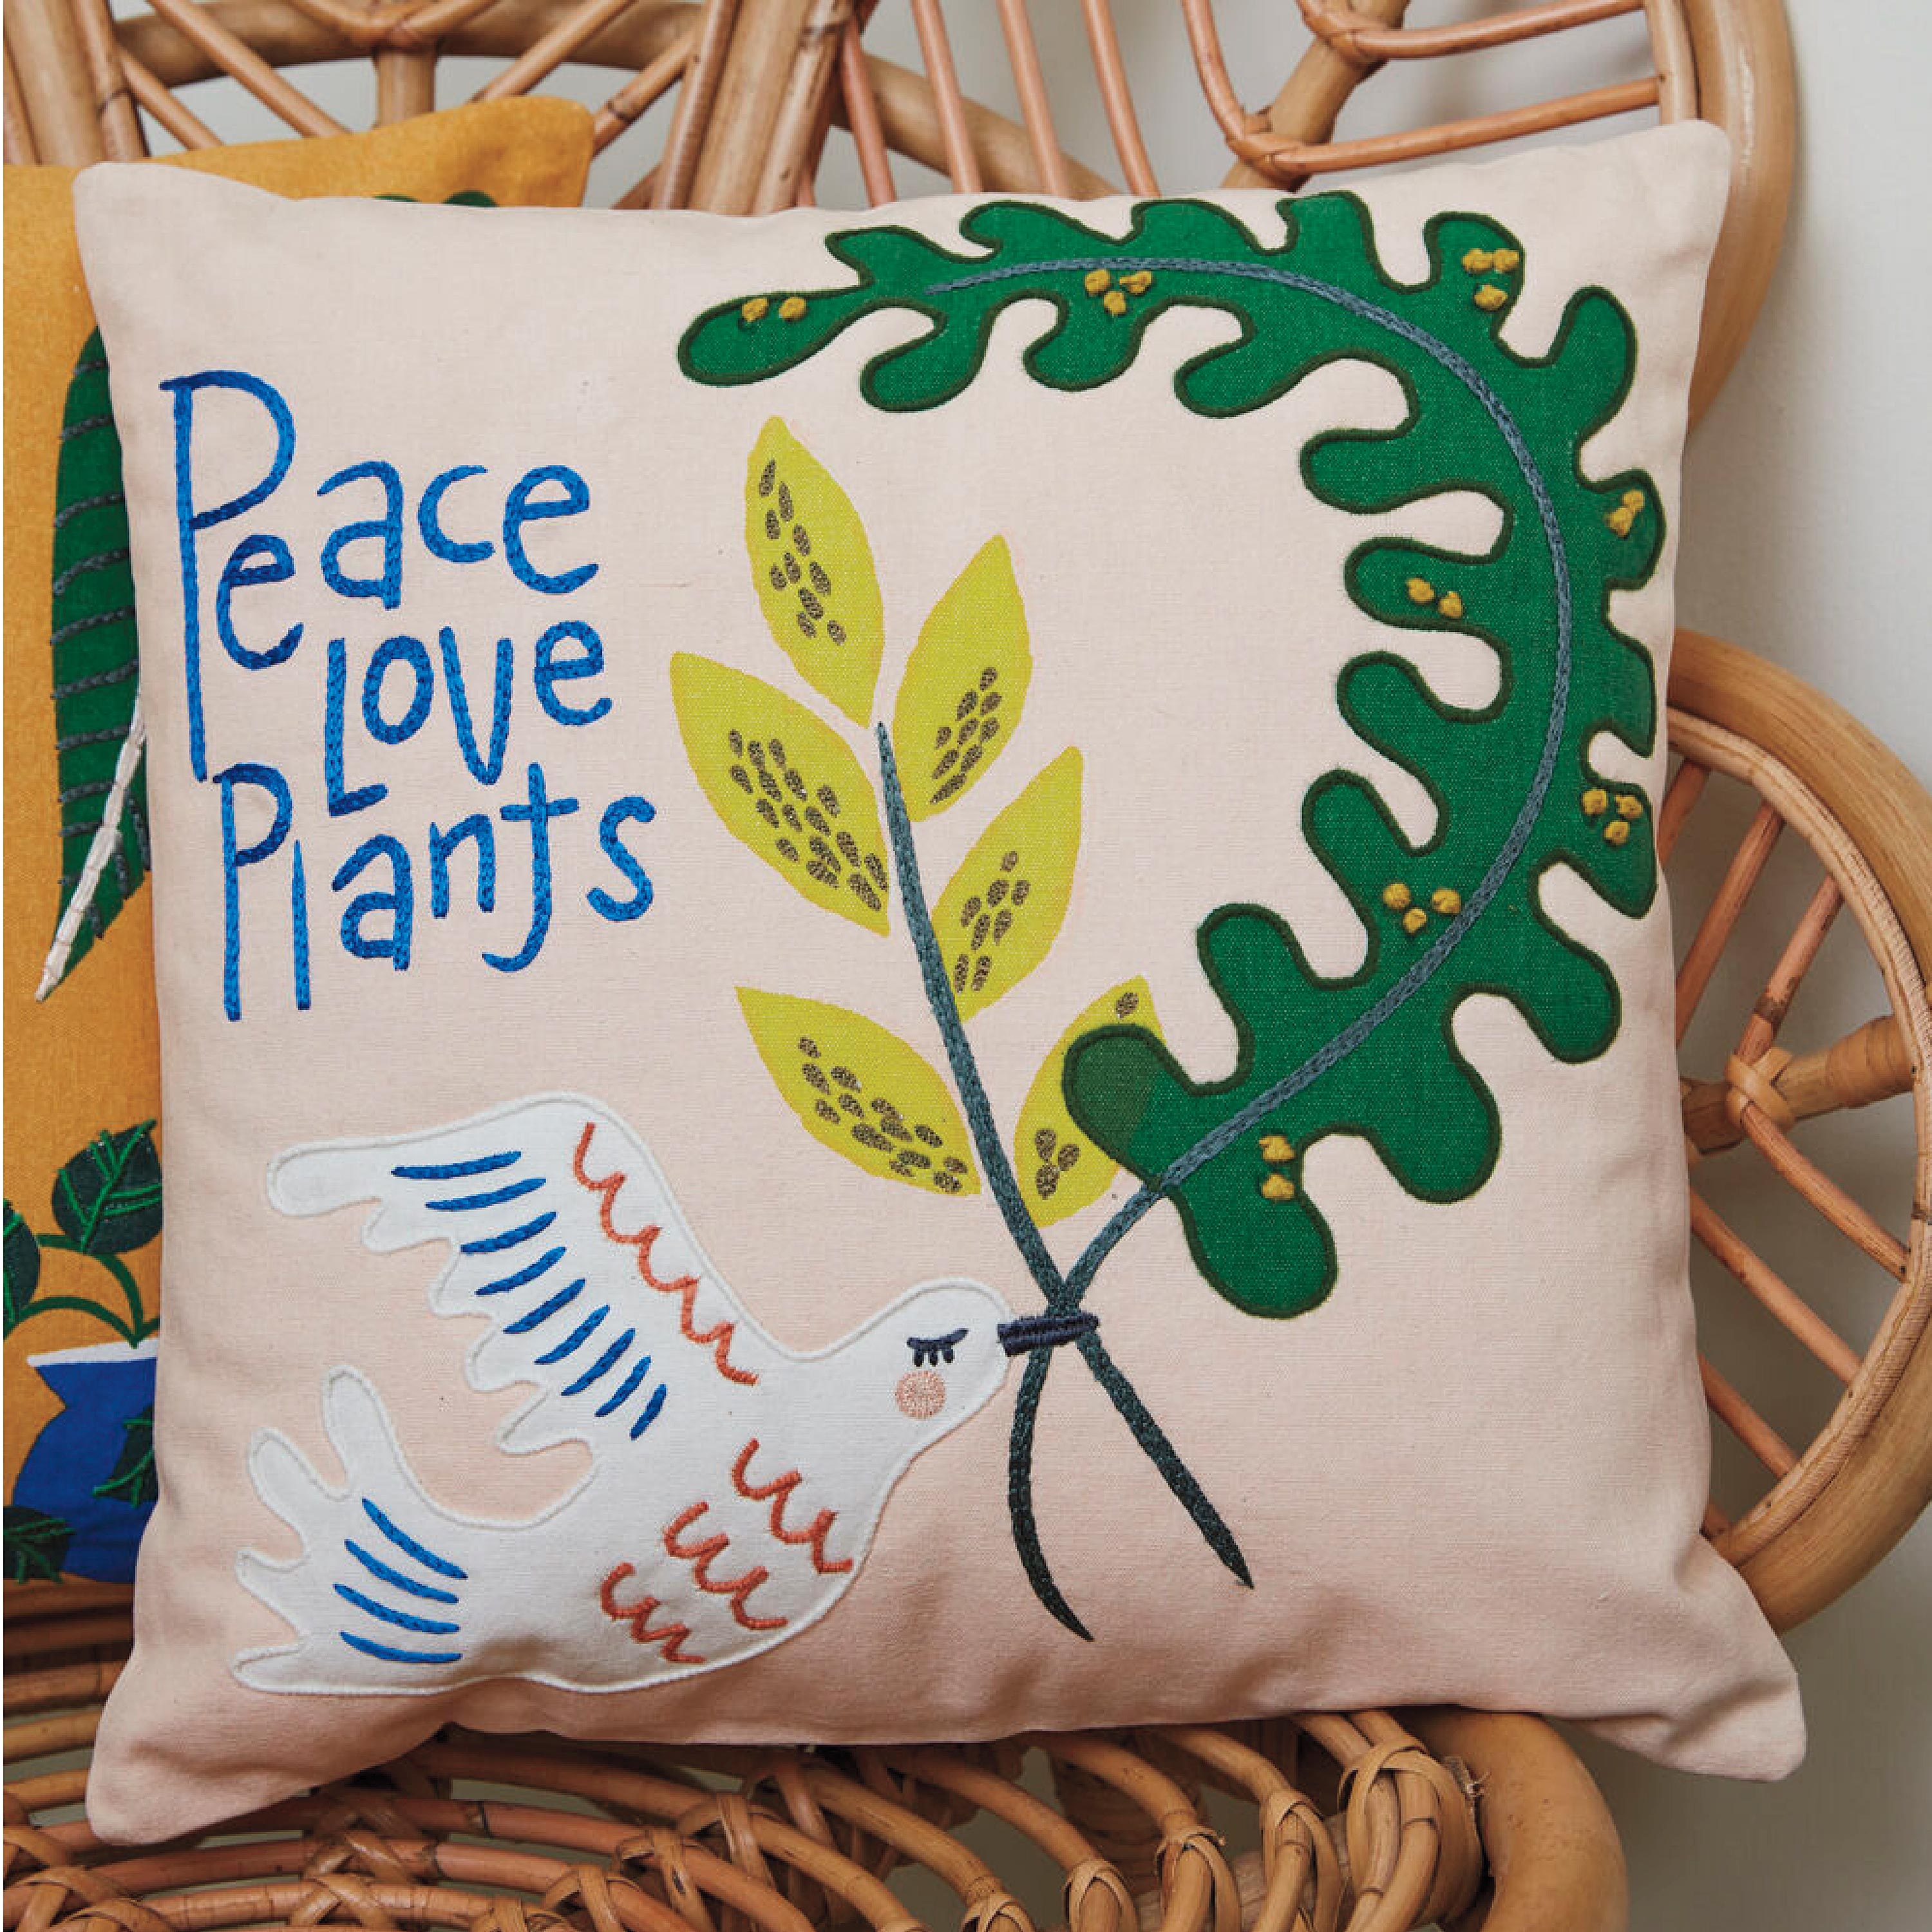 Coral Peace, Love, and Plants Throw Pillow, 16"SQ.